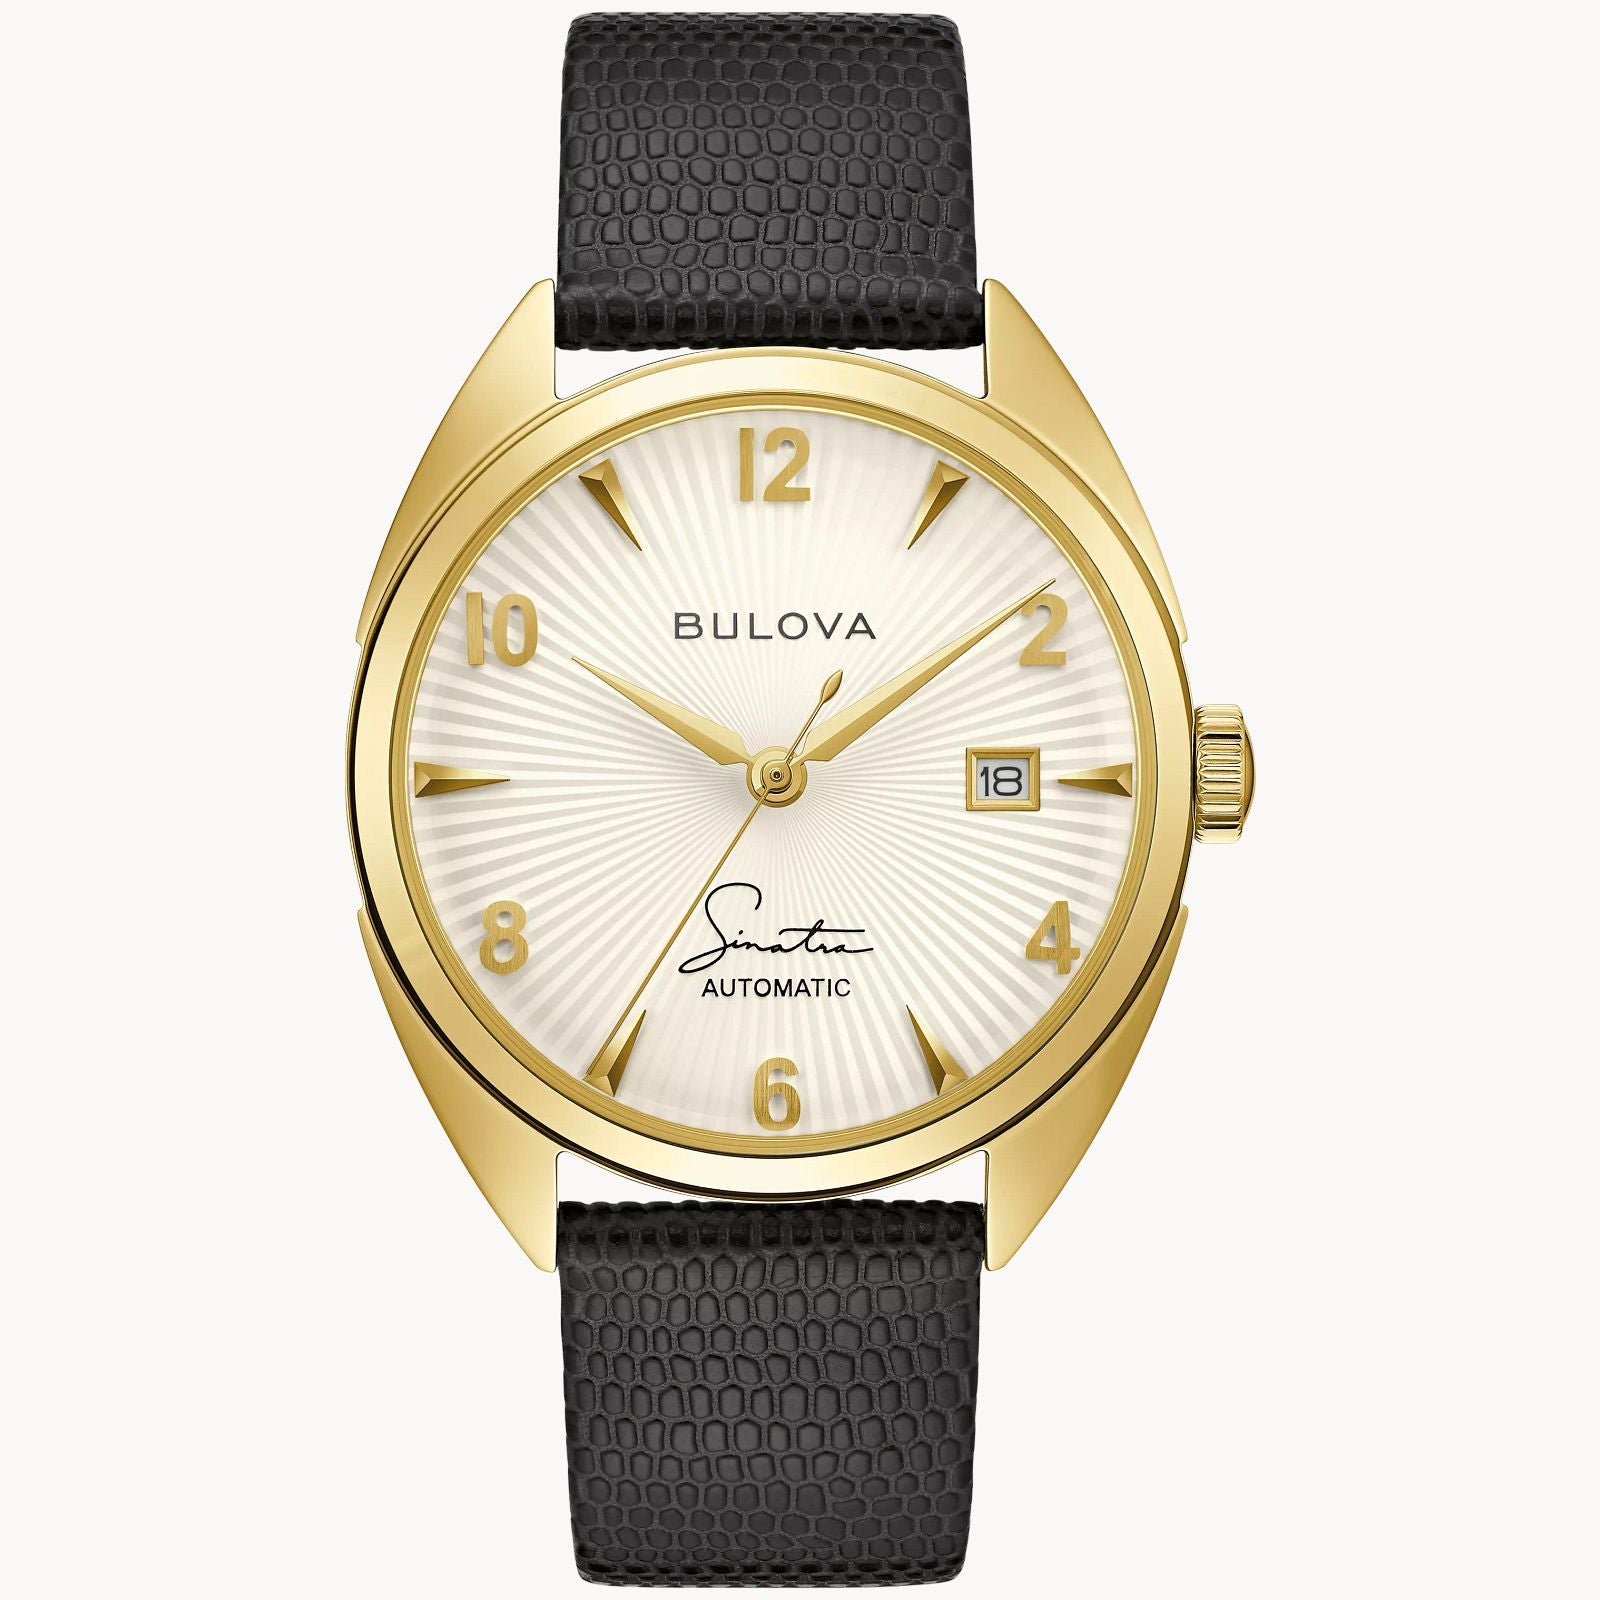 Bulova "Fly Me To The Moon" Frank Sinatra Automatic Timepiece